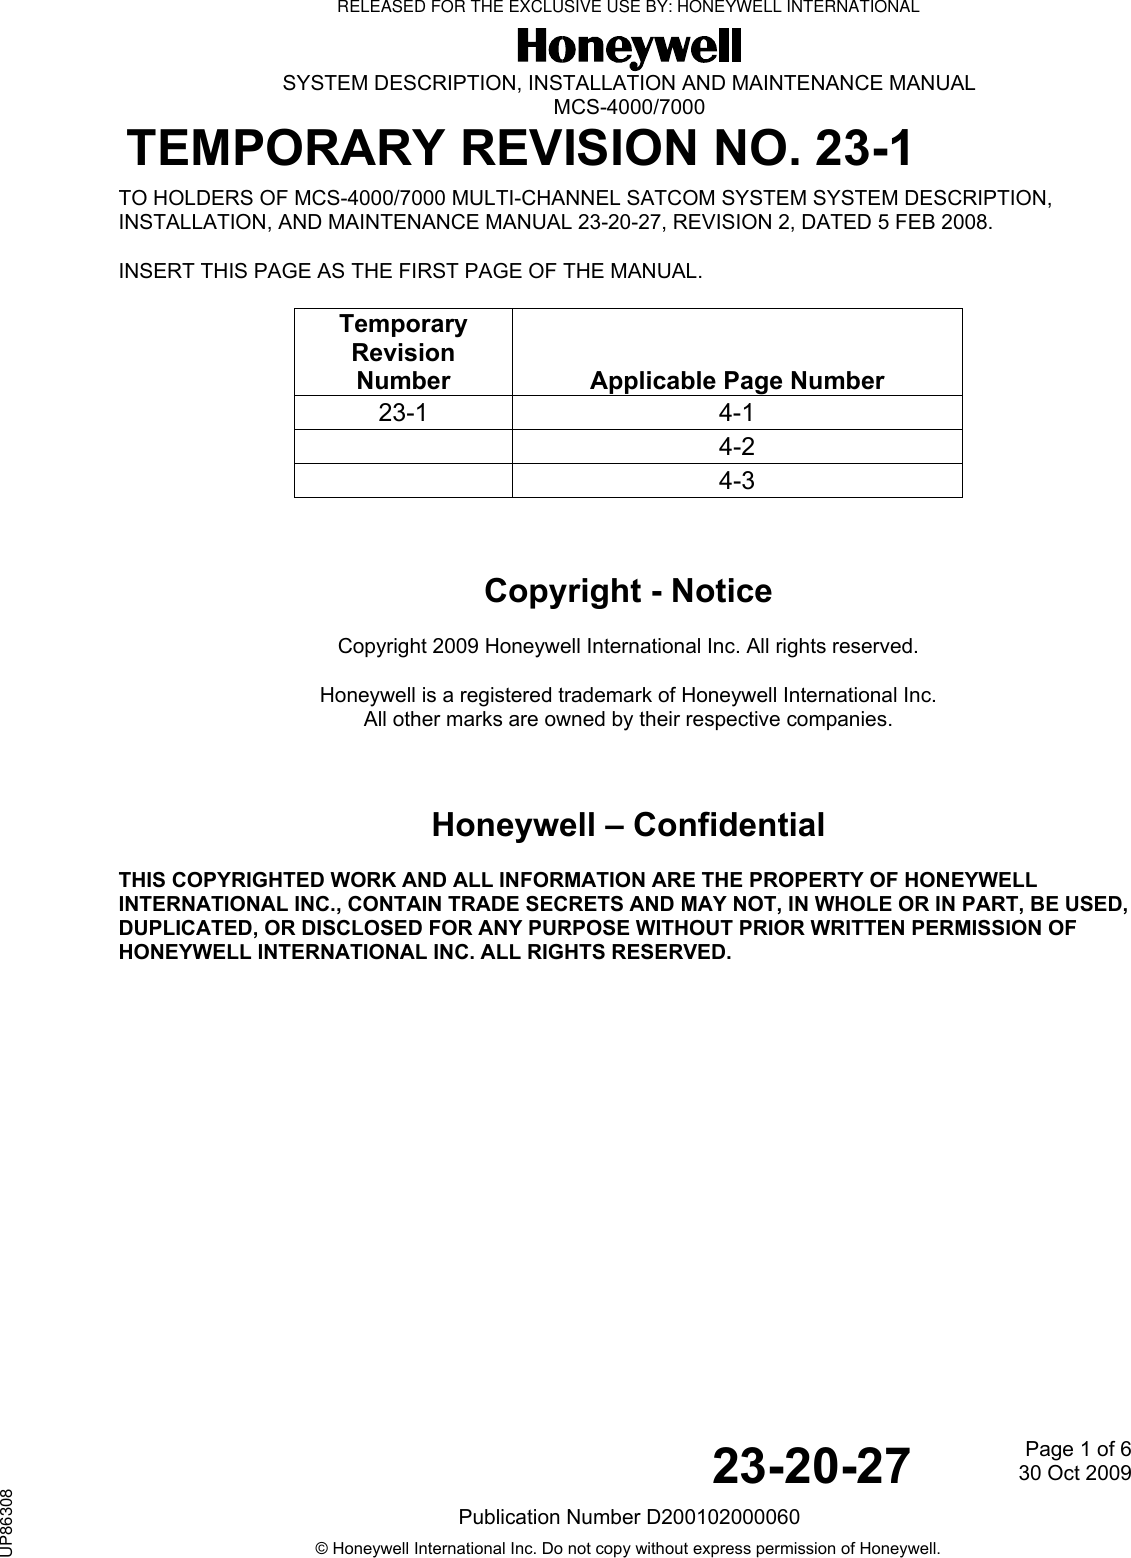   SYSTEM DESCRIPTION, INSTALLATION AND MAINTENANCE MANUAL MCS-4000/7000 TEMPORARY REVISION NO. 23-1   23-20-27  Page 1 of 630 Oct 2009Publication Number D200102000060 © Honeywell International Inc. Do not copy without express permission of Honeywell. TO HOLDERS OF MCS-4000/7000 MULTI-CHANNEL SATCOM SYSTEM SYSTEM DESCRIPTION, INSTALLATION, AND MAINTENANCE MANUAL 23-20-27, REVISION 2, DATED 5 FEB 2008.  INSERT THIS PAGE AS THE FIRST PAGE OF THE MANUAL.  Temporary Revision Number   Applicable Page Number 23-1 4-1  4-2  4-3   Copyright - Notice Copyright 2009 Honeywell International Inc. All rights reserved. Honeywell is a registered trademark of Honeywell International Inc. All other marks are owned by their respective companies.  Honeywell – Confidential THIS COPYRIGHTED WORK AND ALL INFORMATION ARE THE PROPERTY OF HONEYWELL INTERNATIONAL INC., CONTAIN TRADE SECRETS AND MAY NOT, IN WHOLE OR IN PART, BE USED, DUPLICATED, OR DISCLOSED FOR ANY PURPOSE WITHOUT PRIOR WRITTEN PERMISSION OF HONEYWELL INTERNATIONAL INC. ALL RIGHTS RESERVED.    RELEASED FOR THE EXCLUSIVE USE BY: HONEYWELL INTERNATIONALUP86308